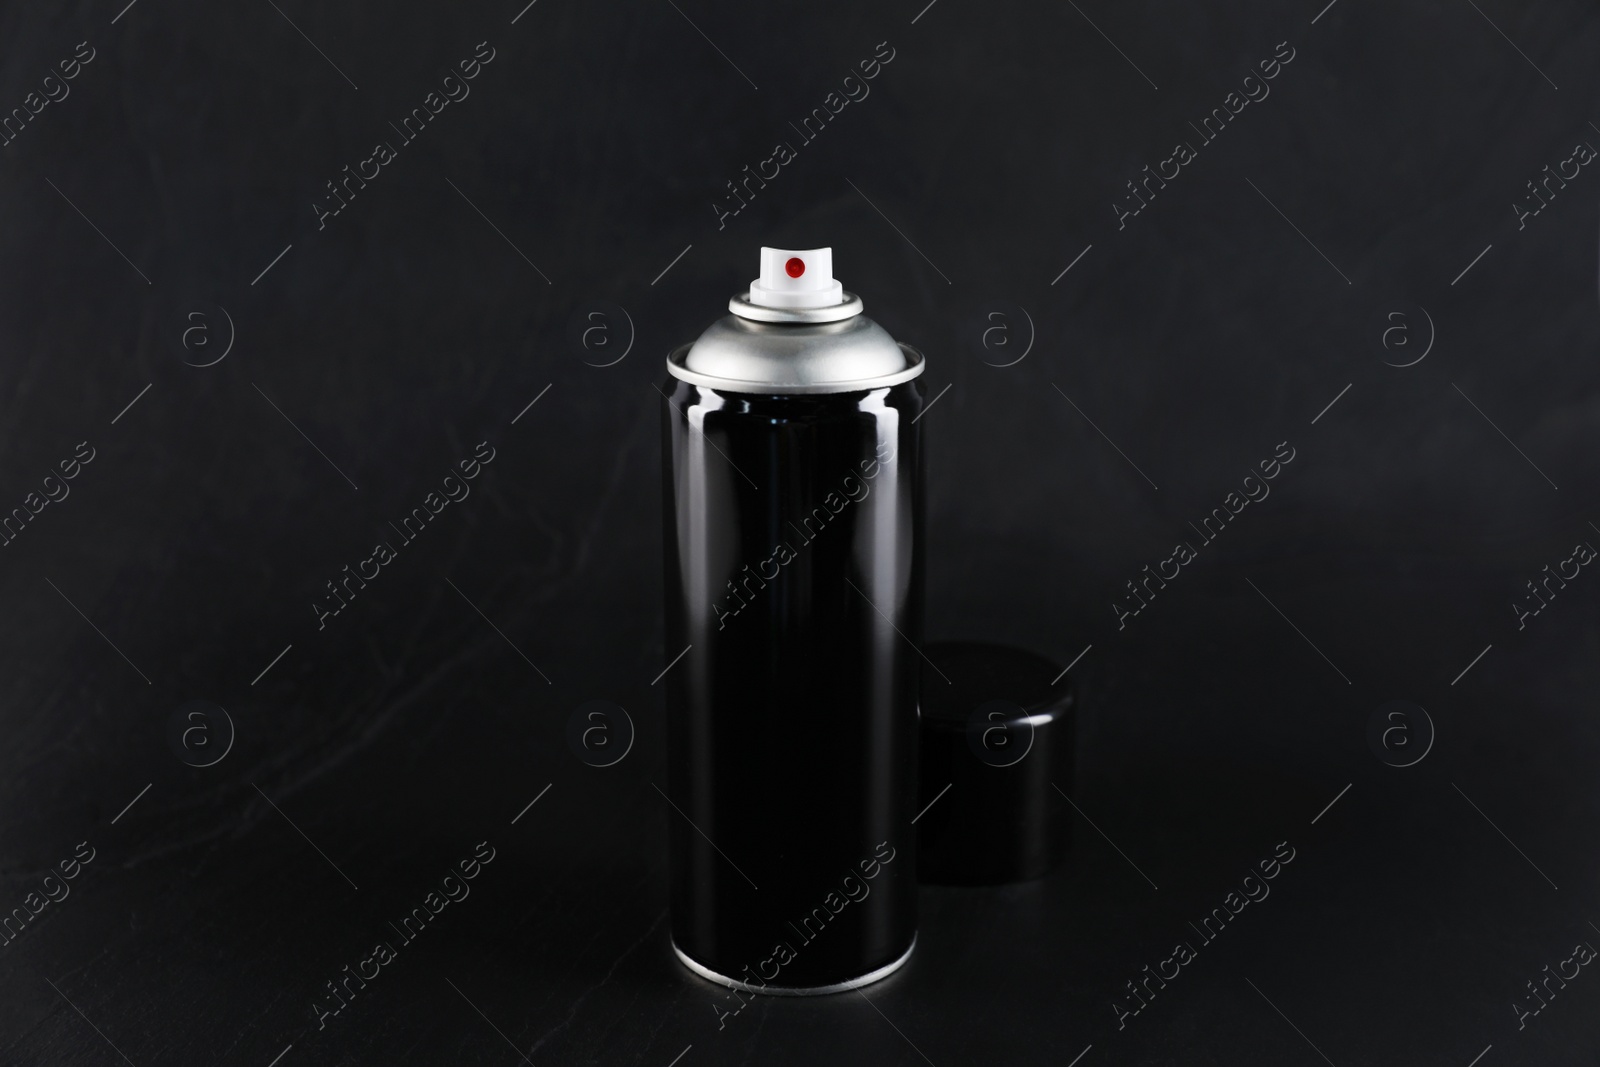 Photo of Can of spray paint on black background